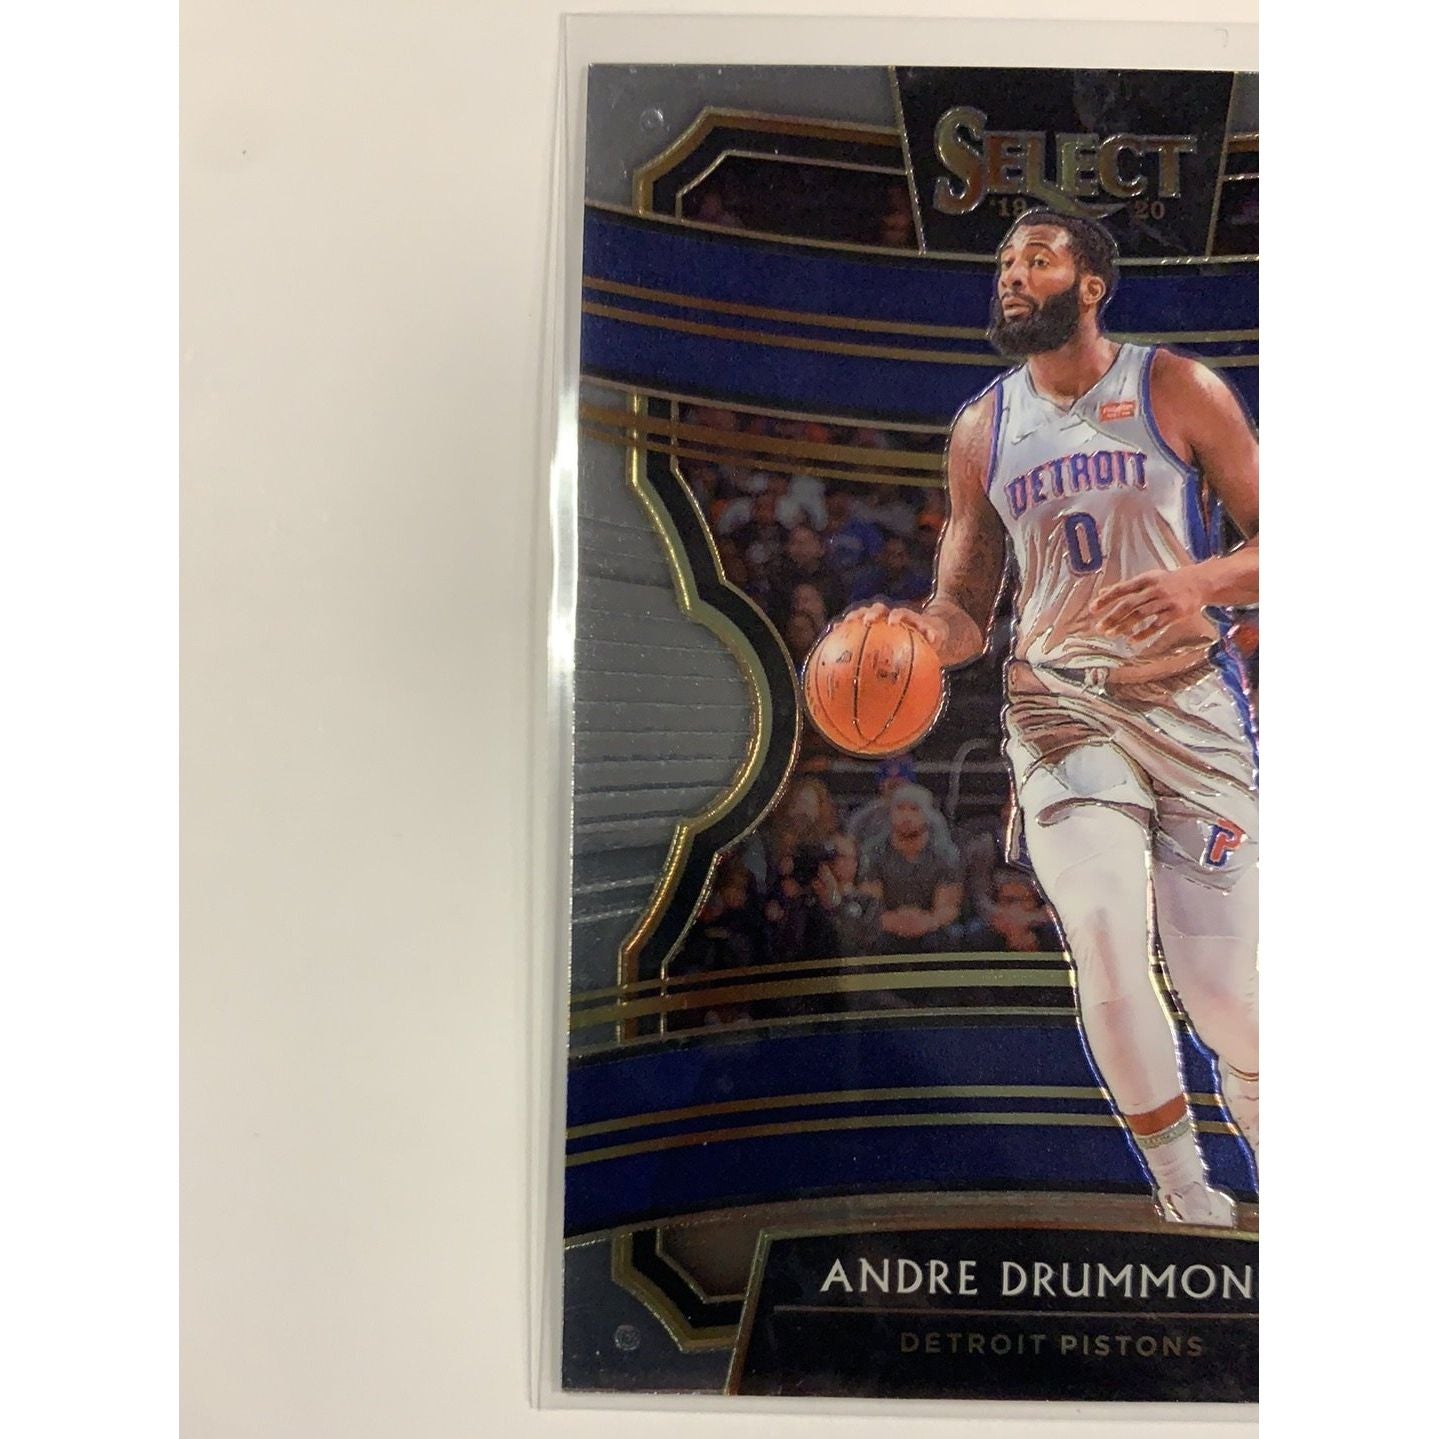  2019-20 Panini Select Andre Drummond Base #16  Local Legends Cards & Collectibles